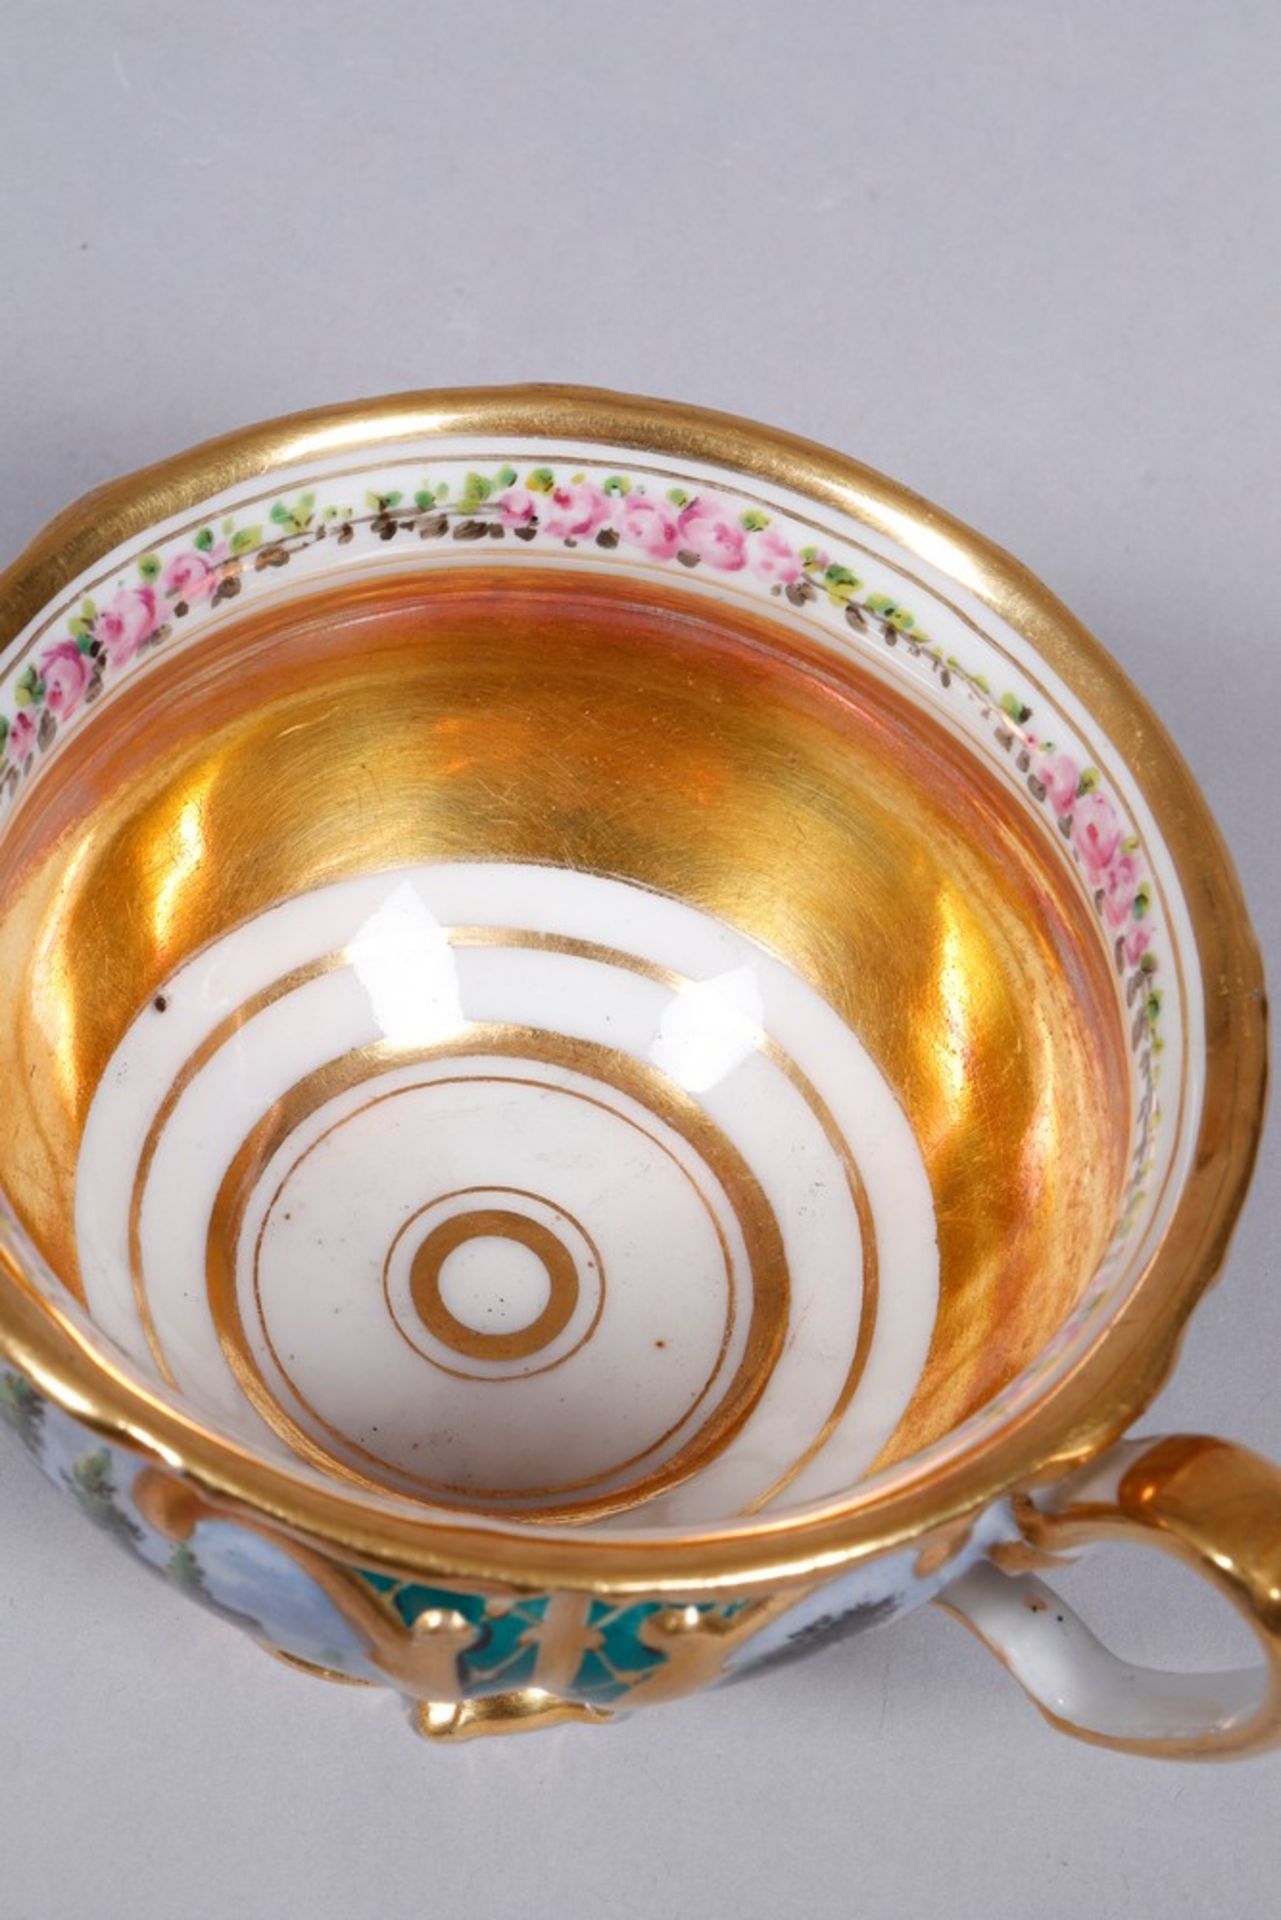 Biedermeier cup and saucer, probably Thuringia, ca. 1841 - Image 3 of 8